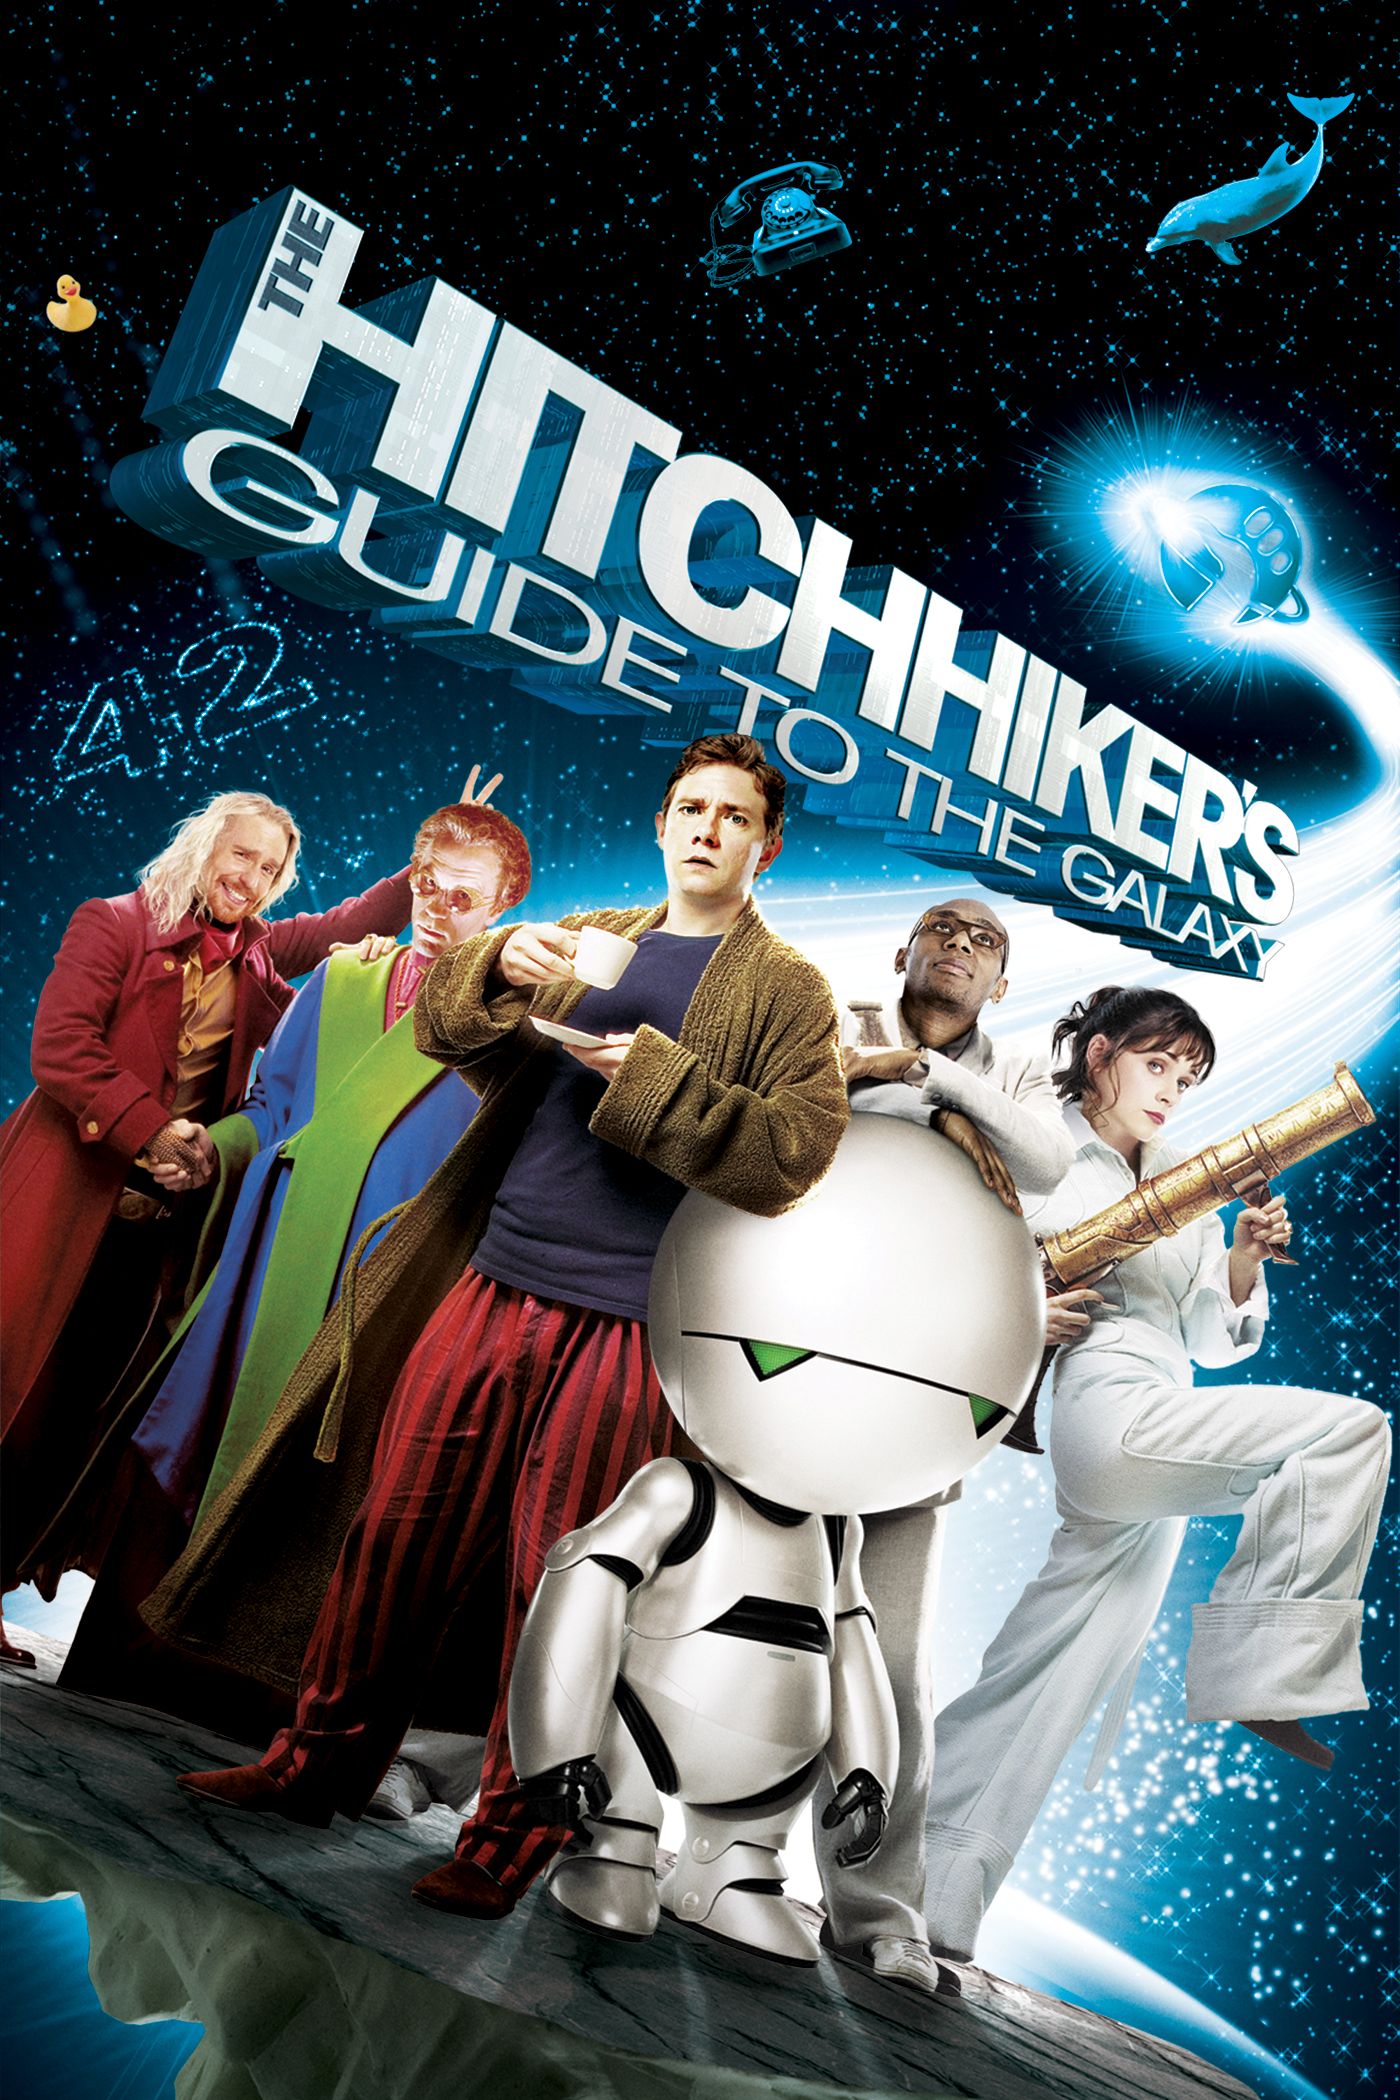 We did it!, The Hitchhiker's Guide to the Galaxy